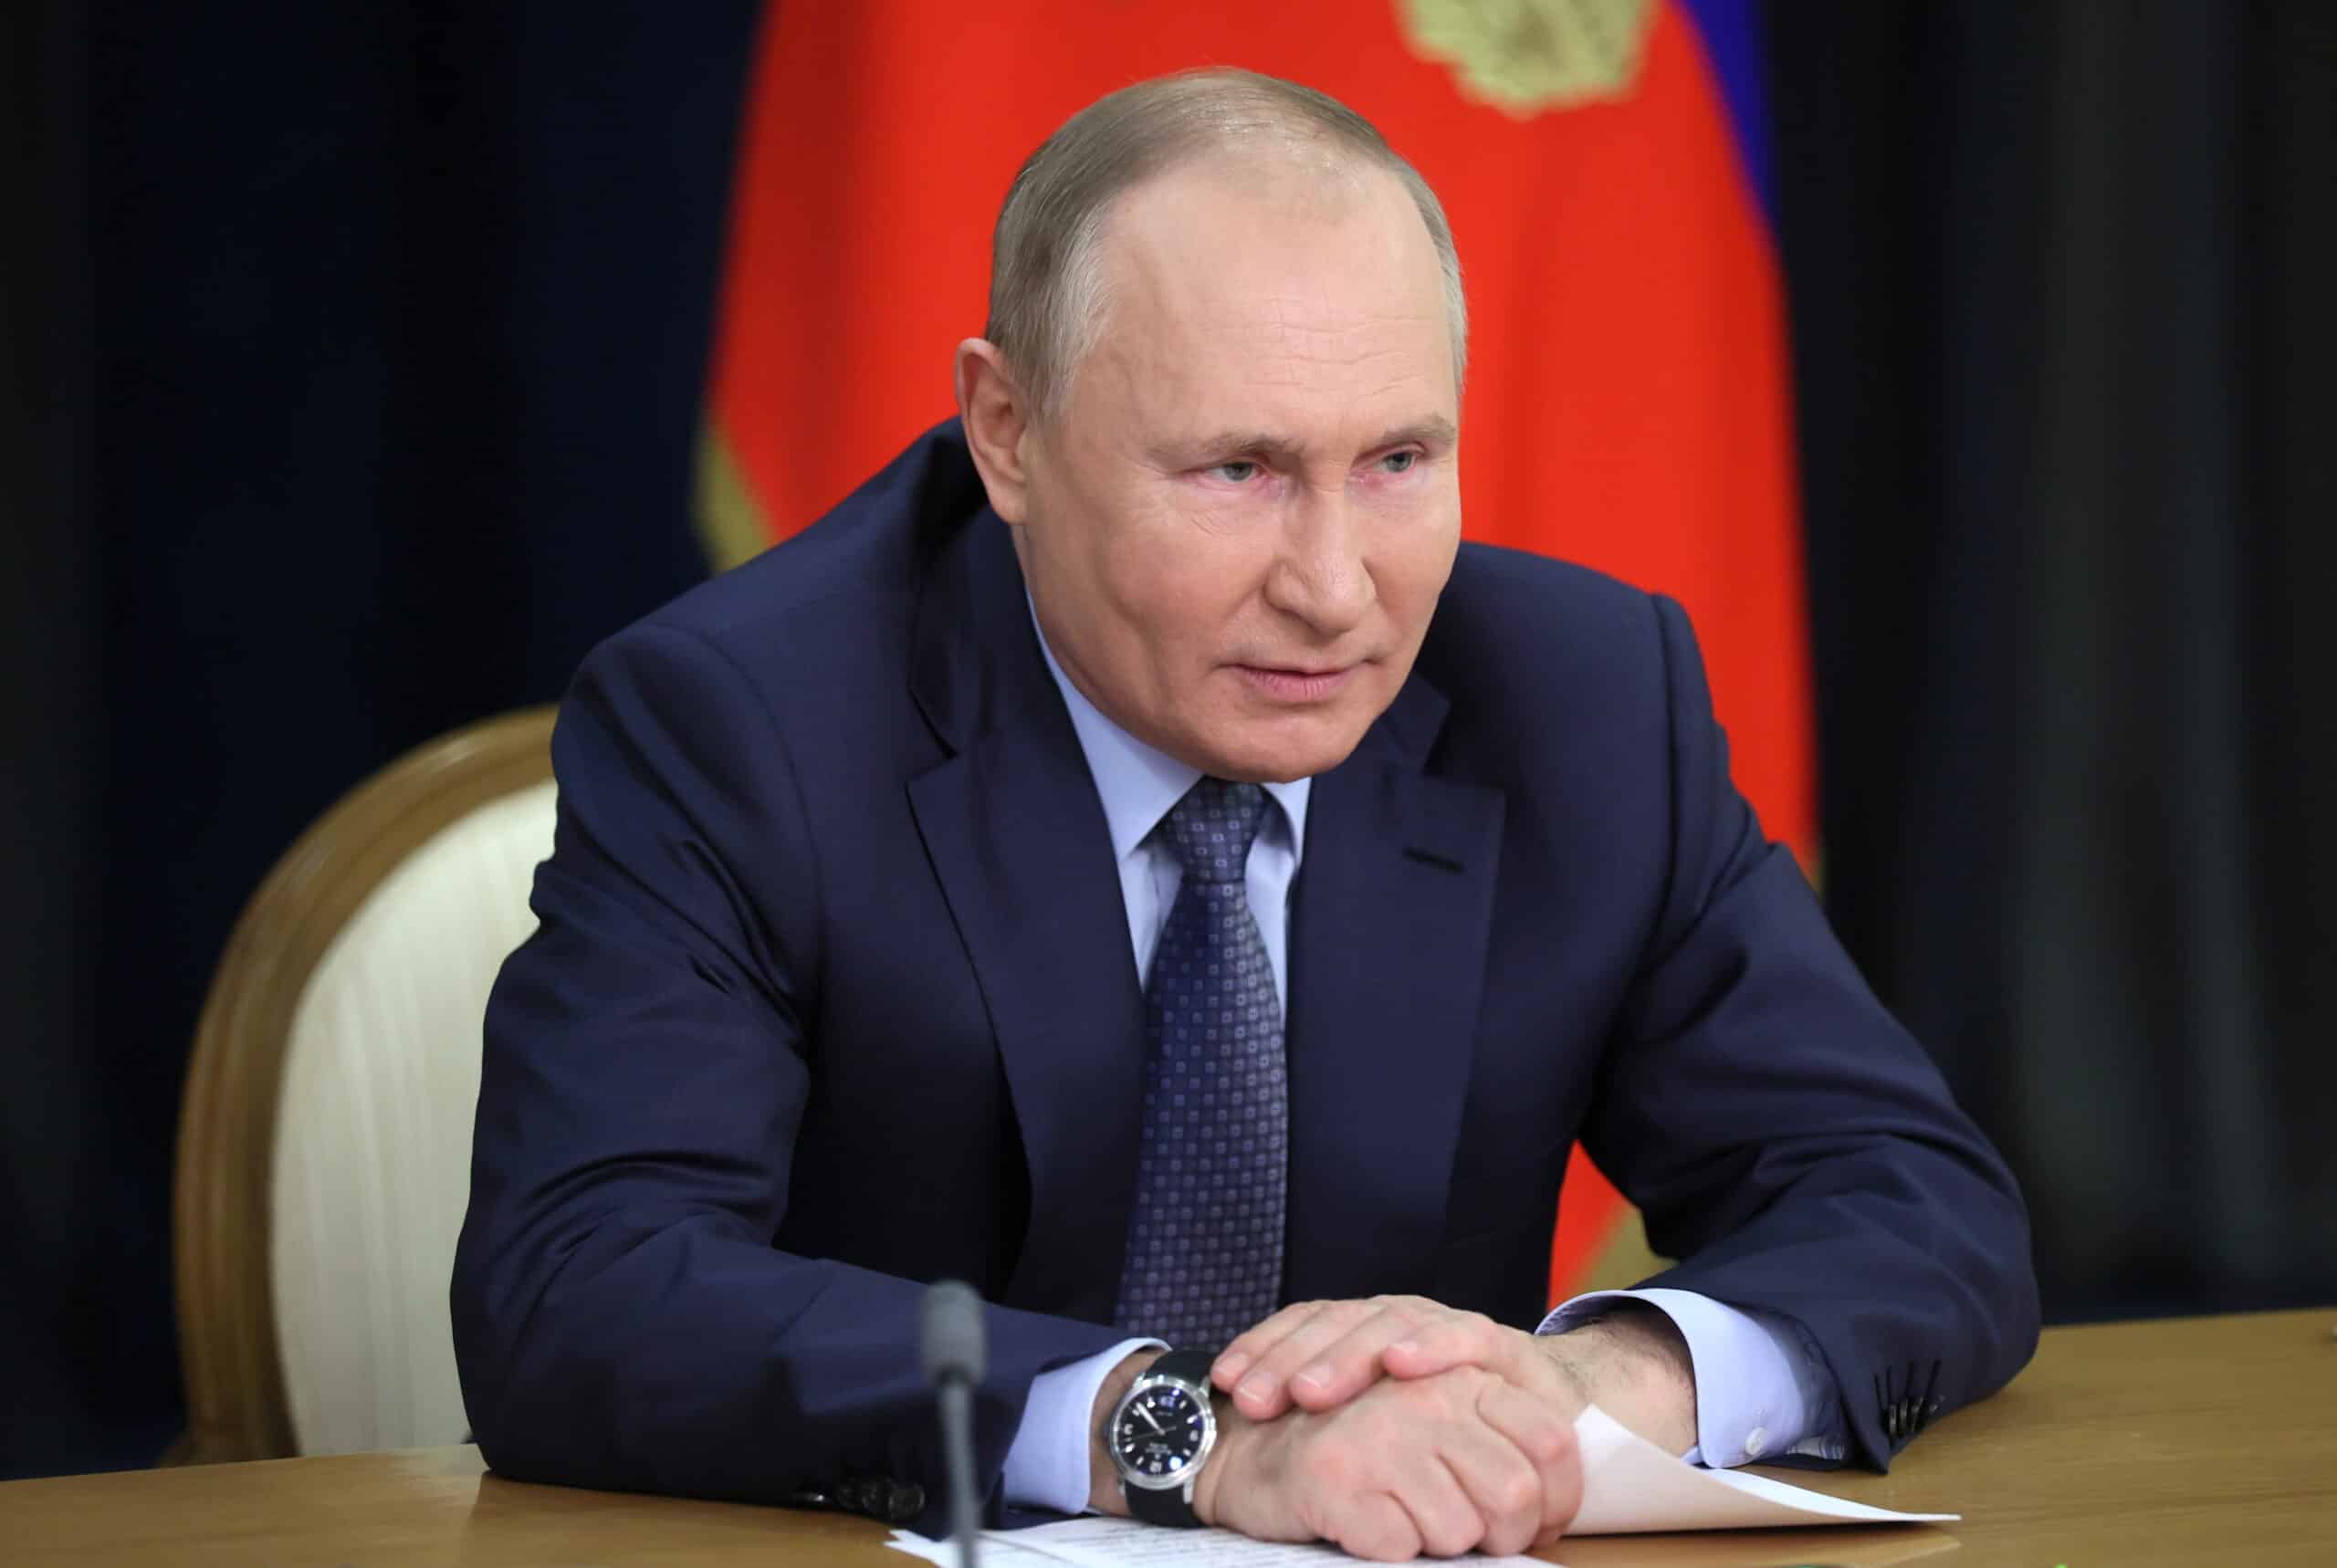 Russian President Vladimir Putin Takes Part In A Ceremony Via A Video Link In Sochi